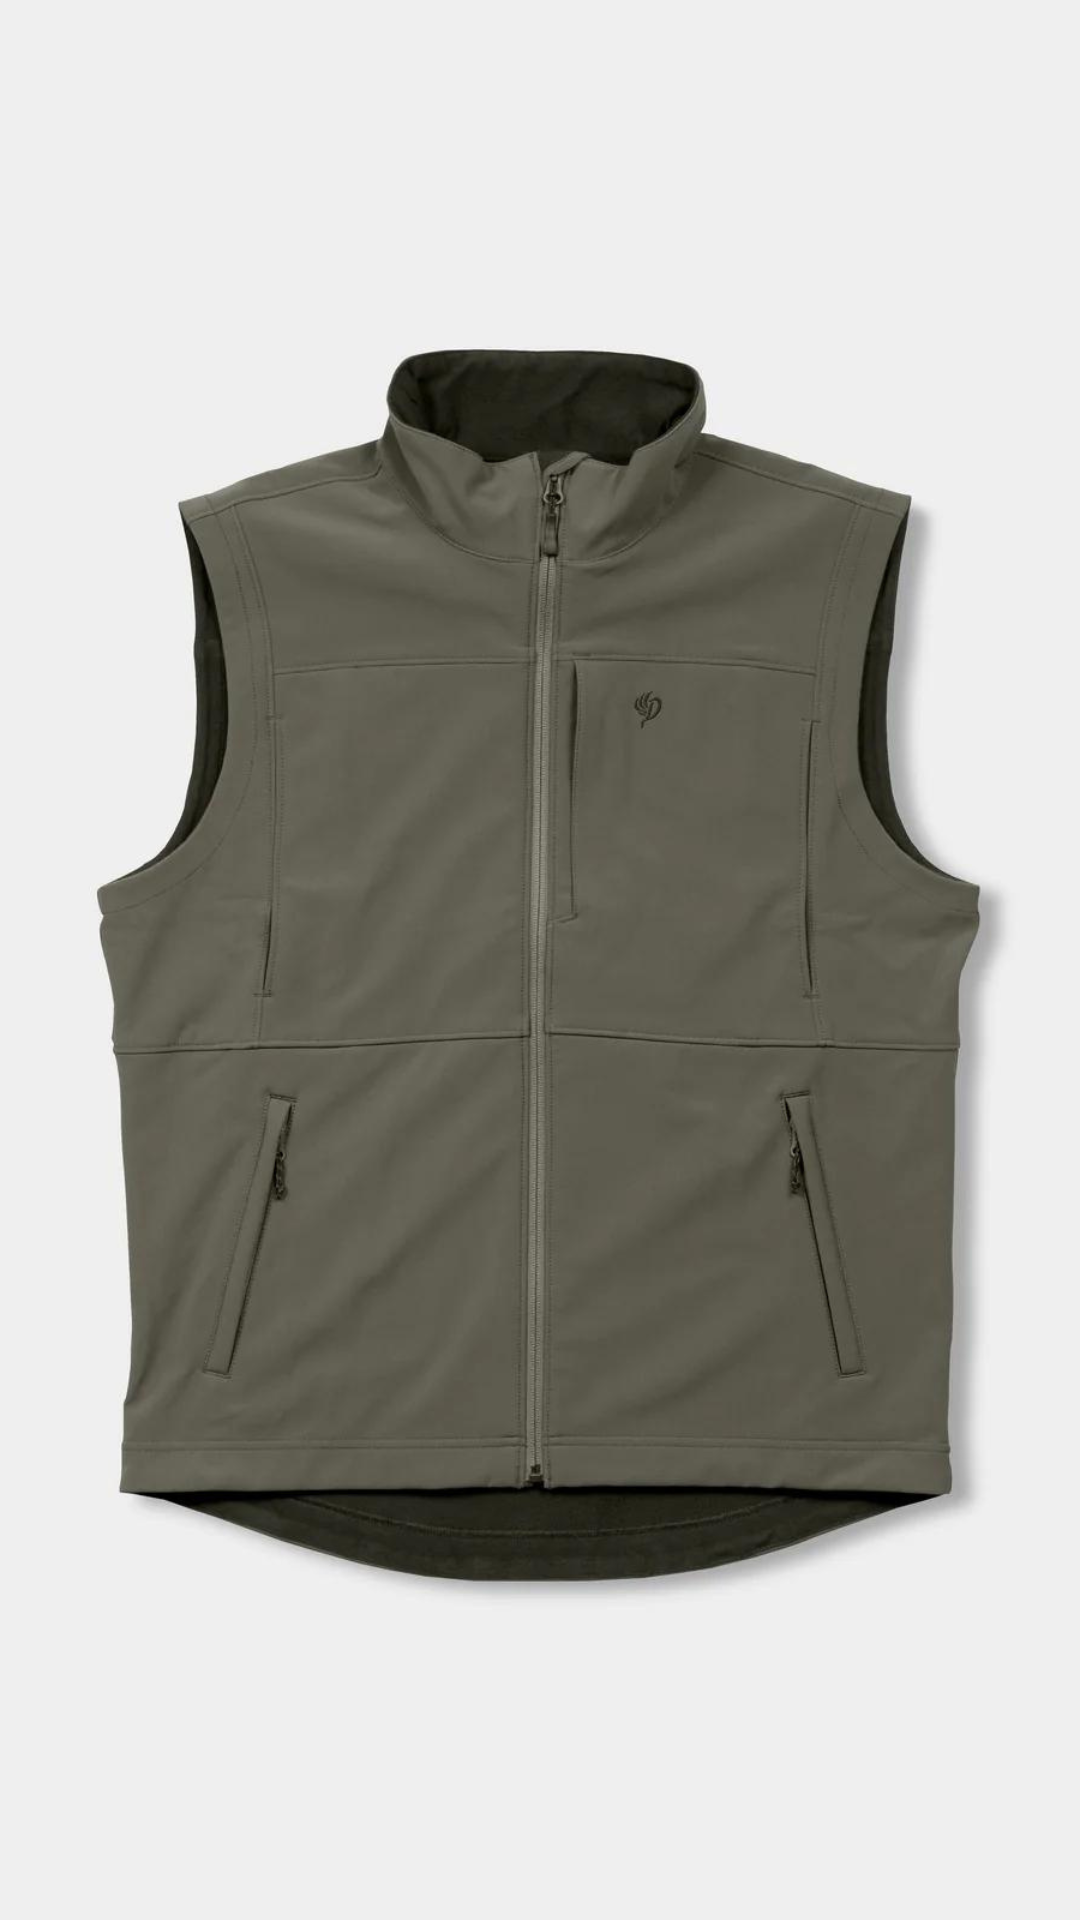 Contact Soft Shell Vest